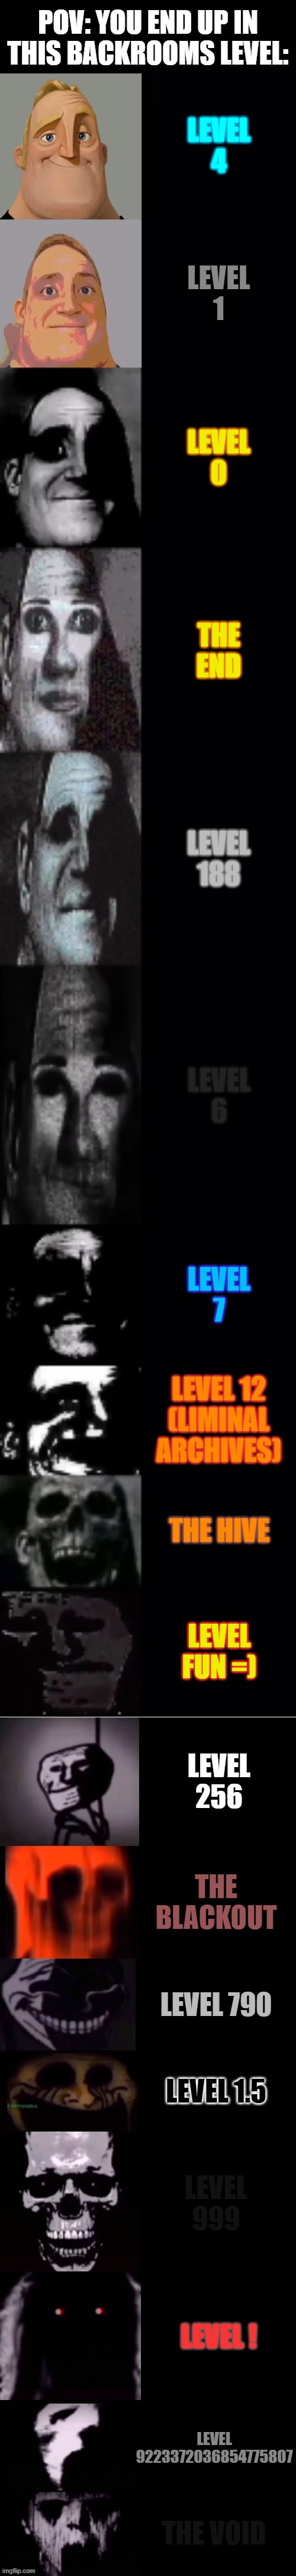 Level 148 - The Living Level - The Backrooms